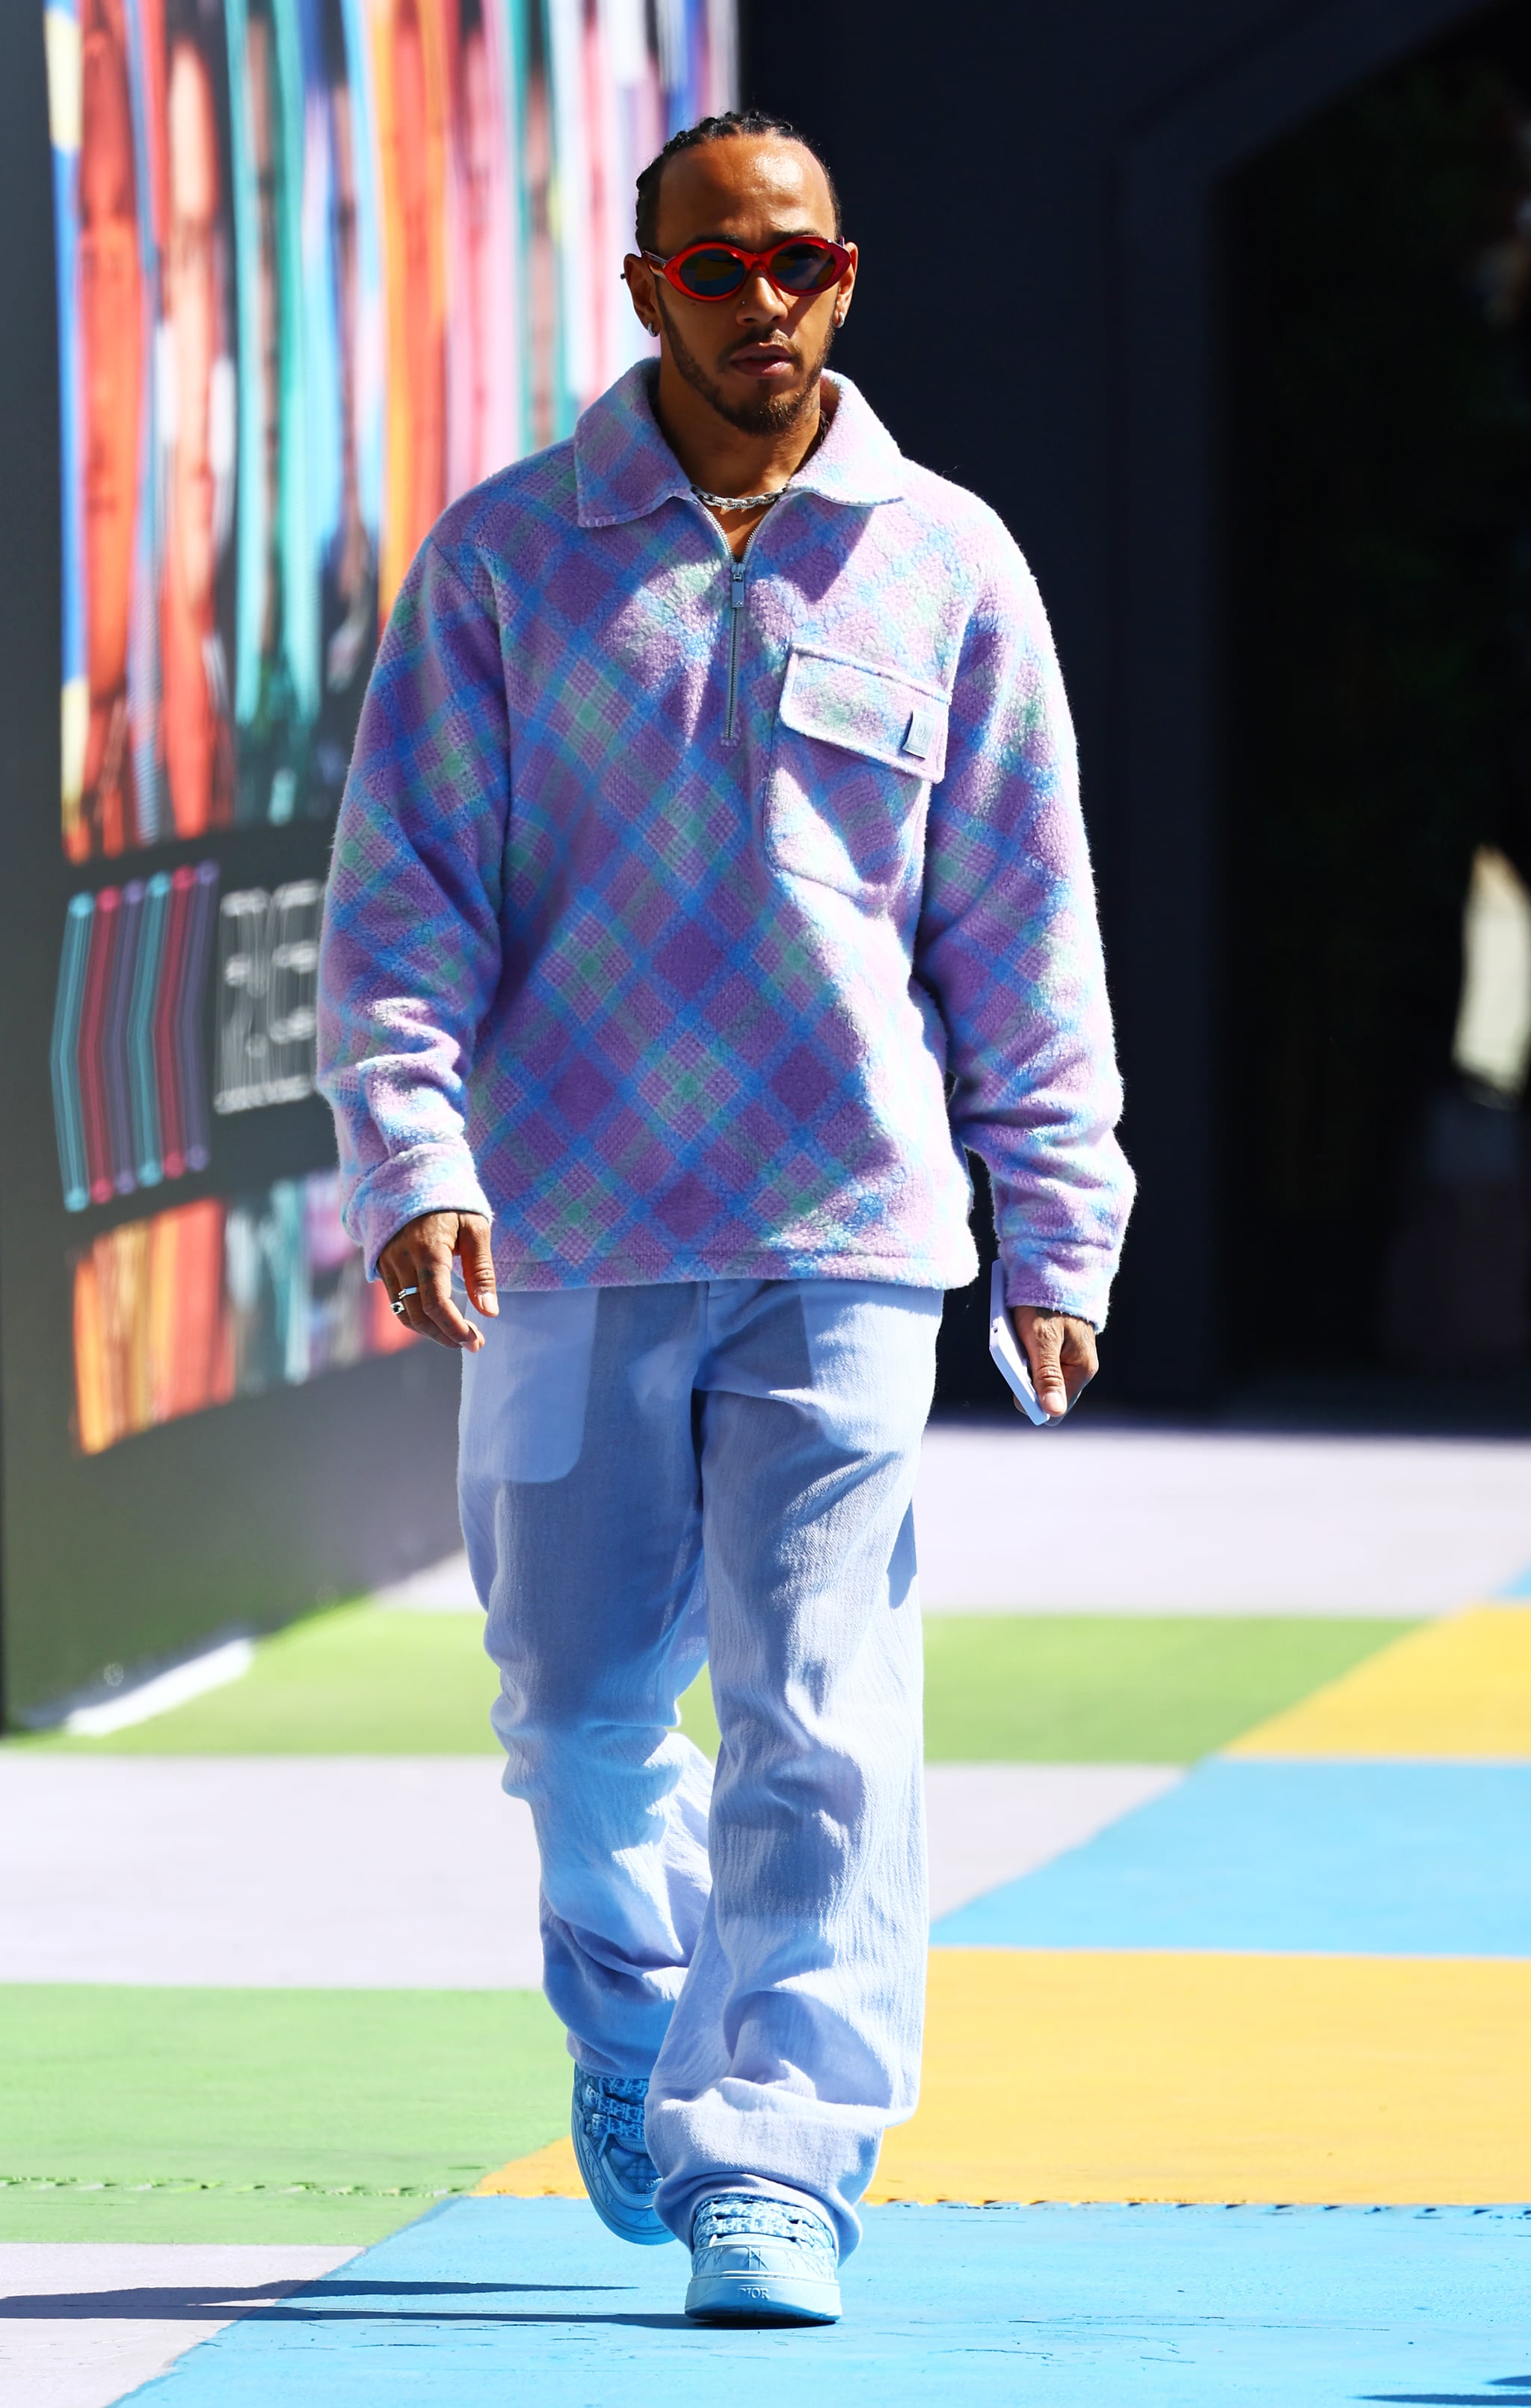 Lewis Hamilton's outfit 30.04.2023 in 2023